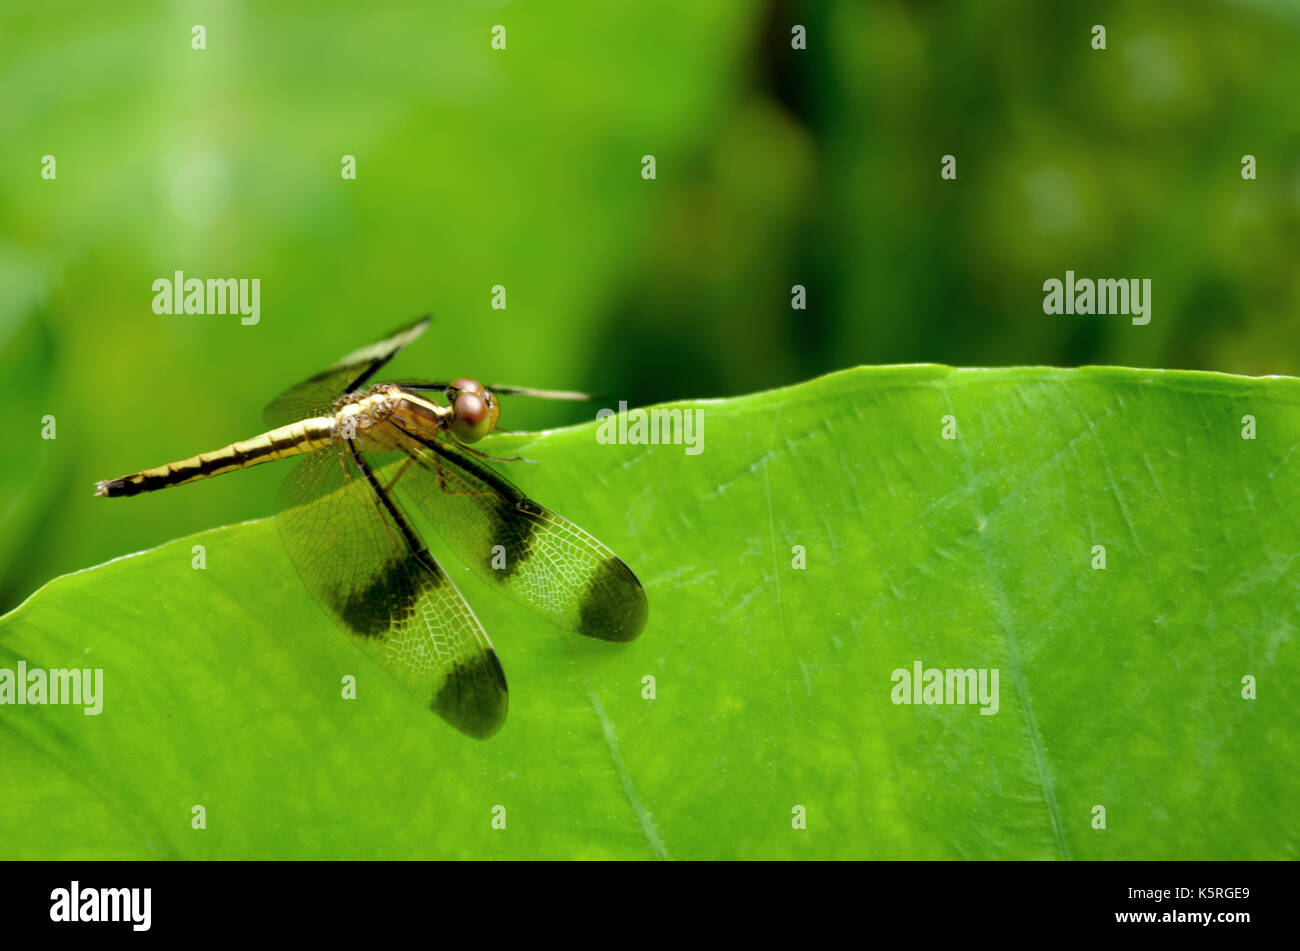 Dragonfly resting on a green leaf against green background. Stock Photo